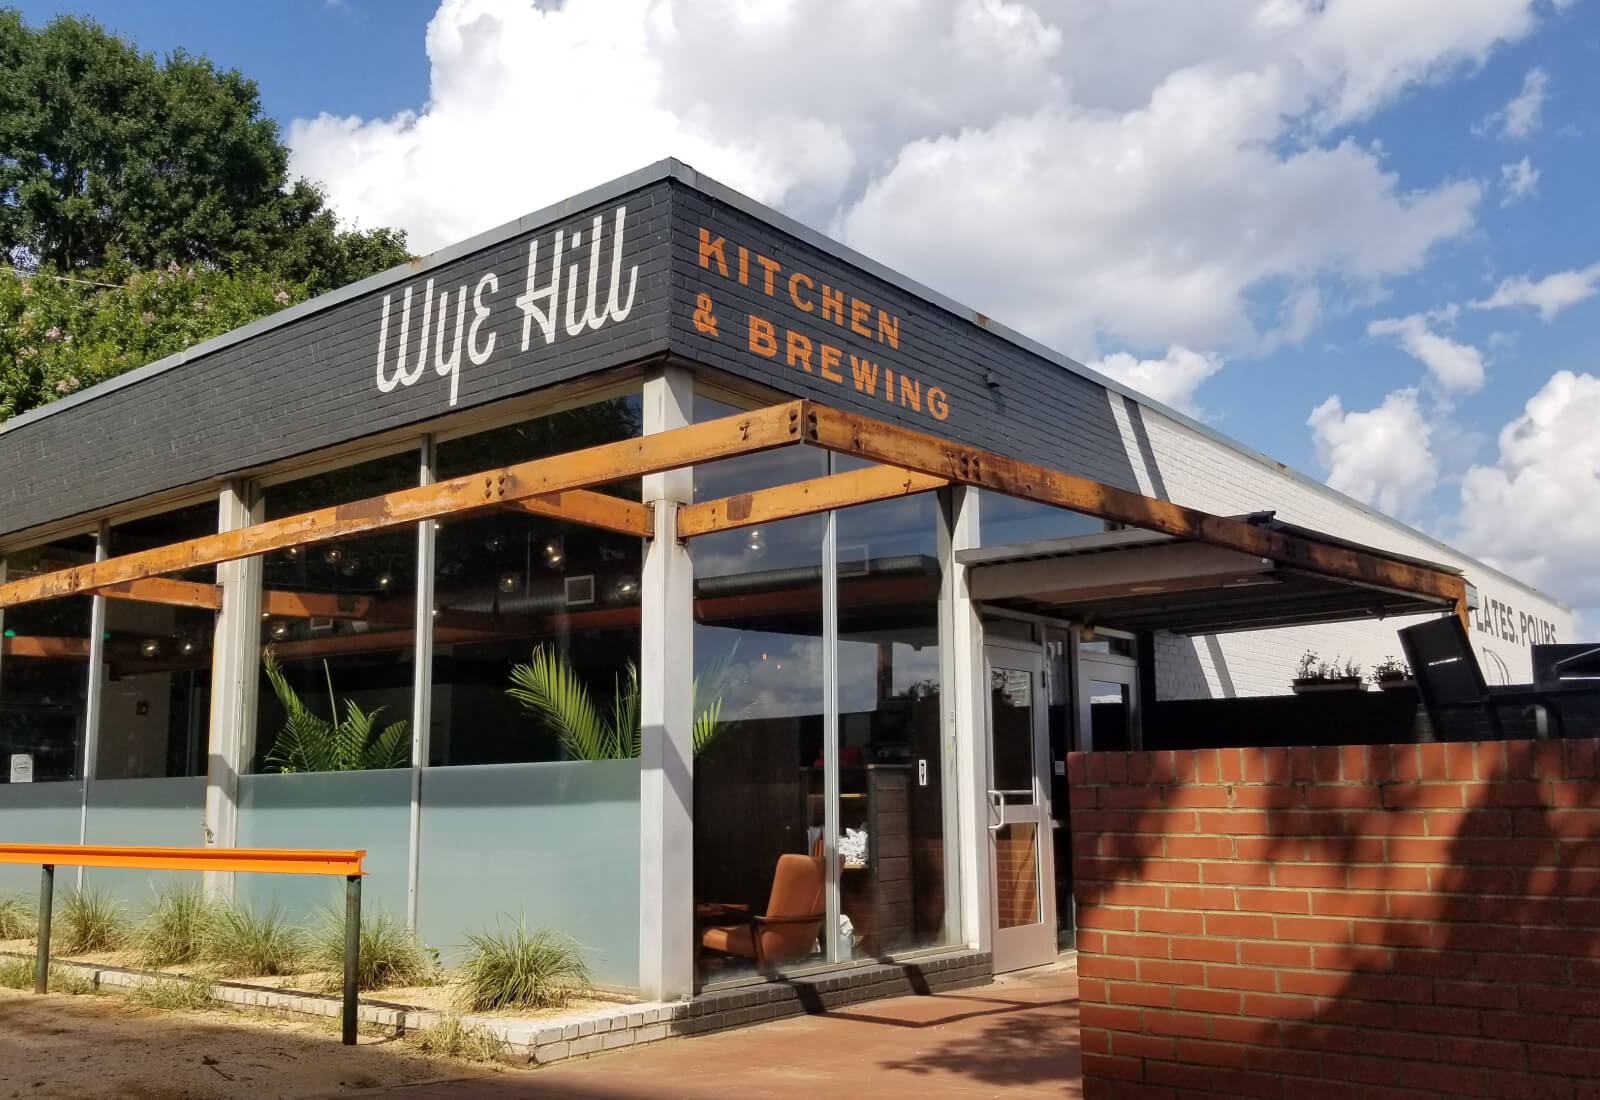 Logo & Exterior Signage | Brand Identity for Wye Hill Kitchen and Brewing in Raleigh, NC